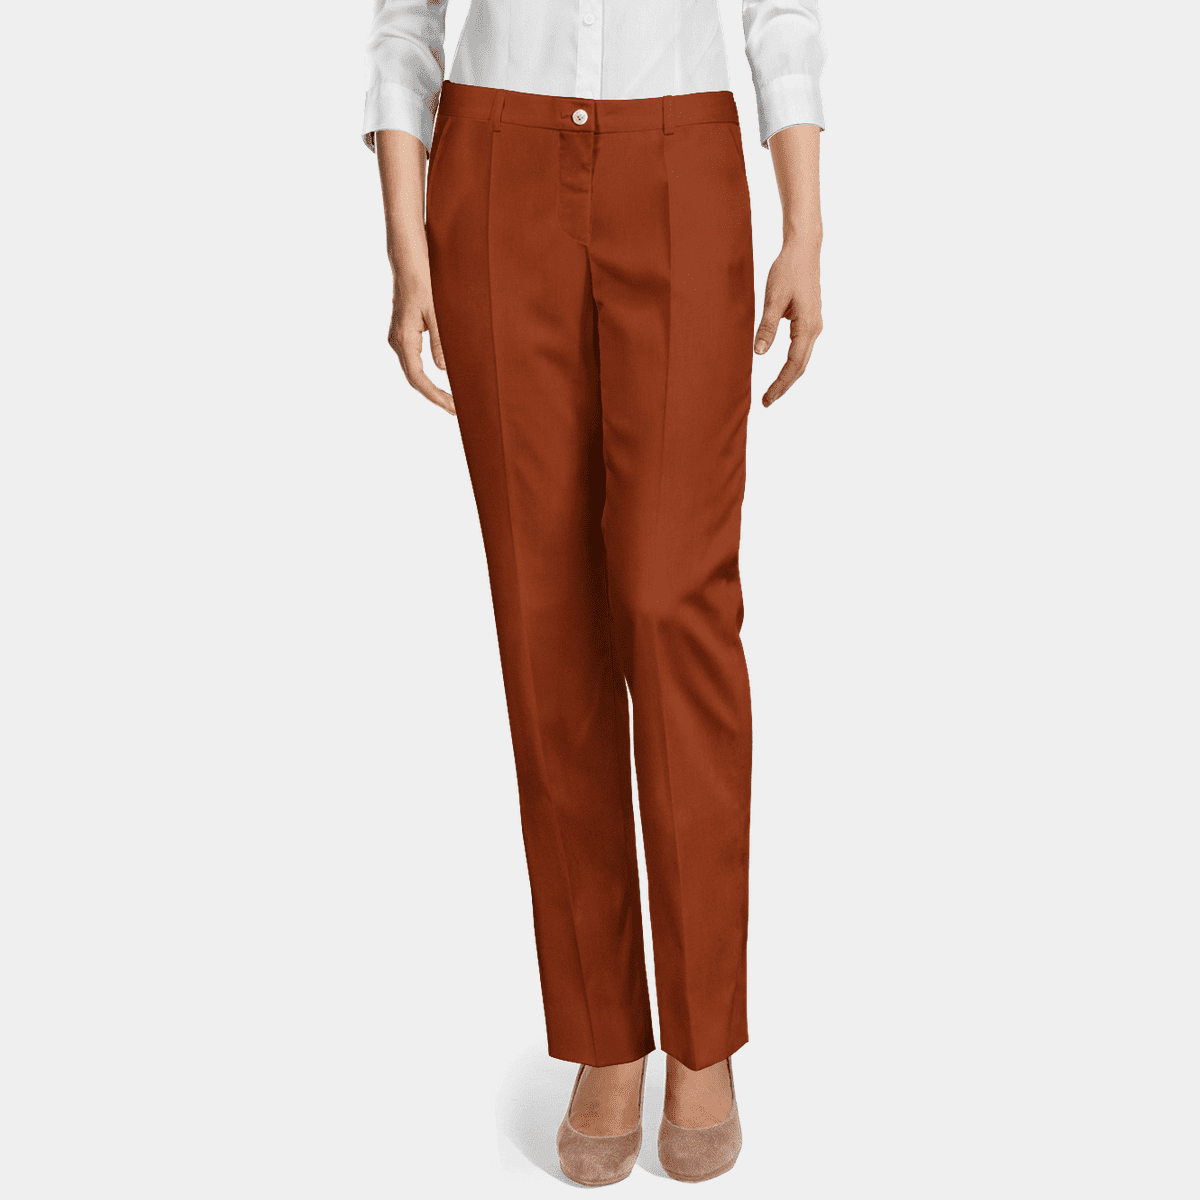 Buy Brown Pants for Women by ETHNIC CURRY Online  Ajiocom